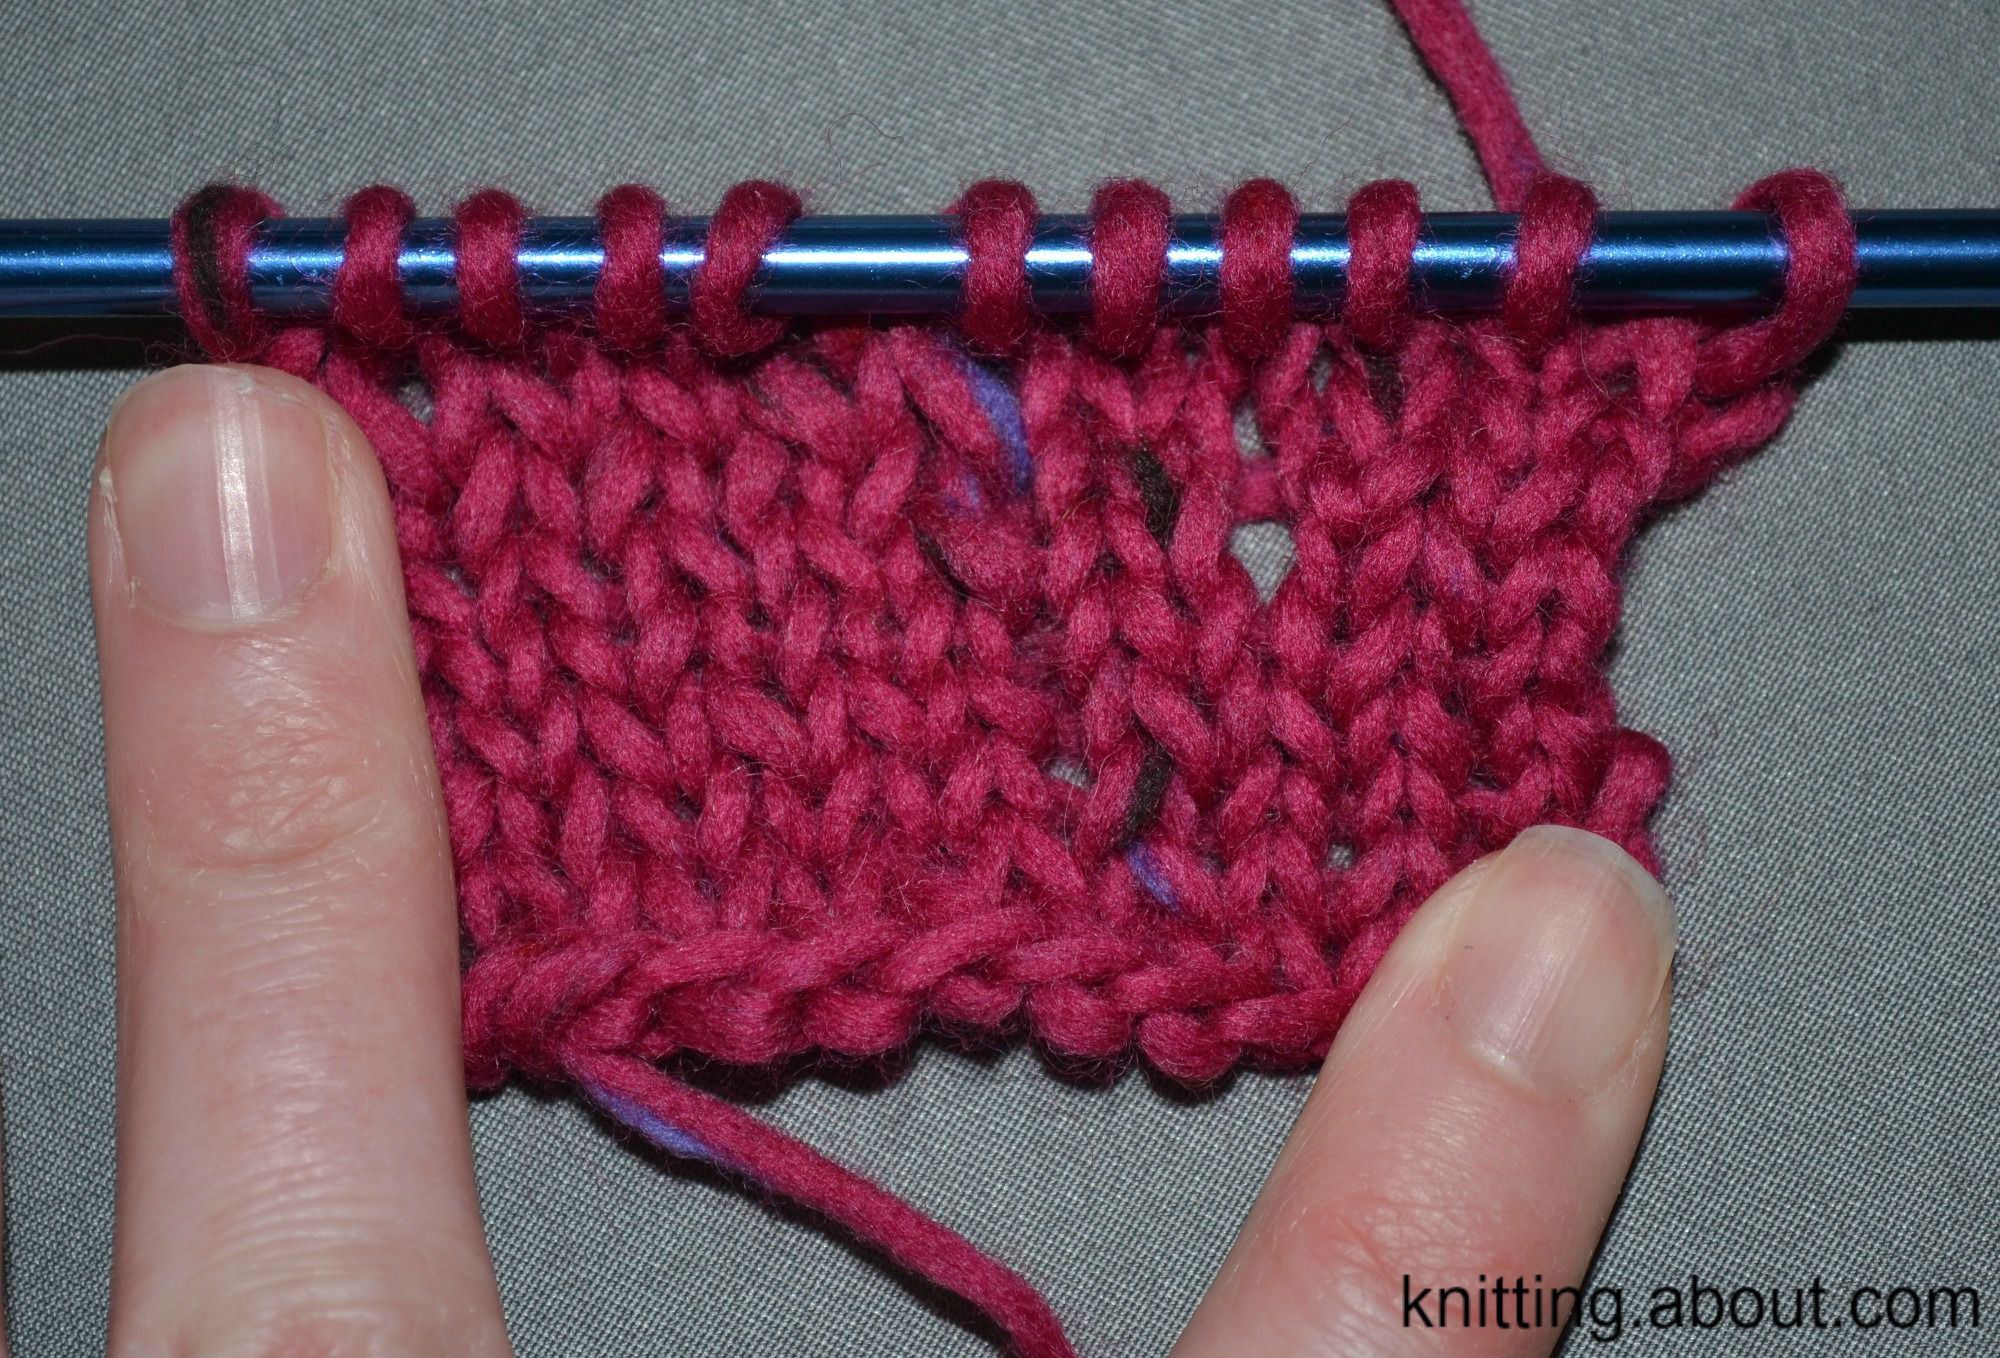 What Causes Holes in Knitting?